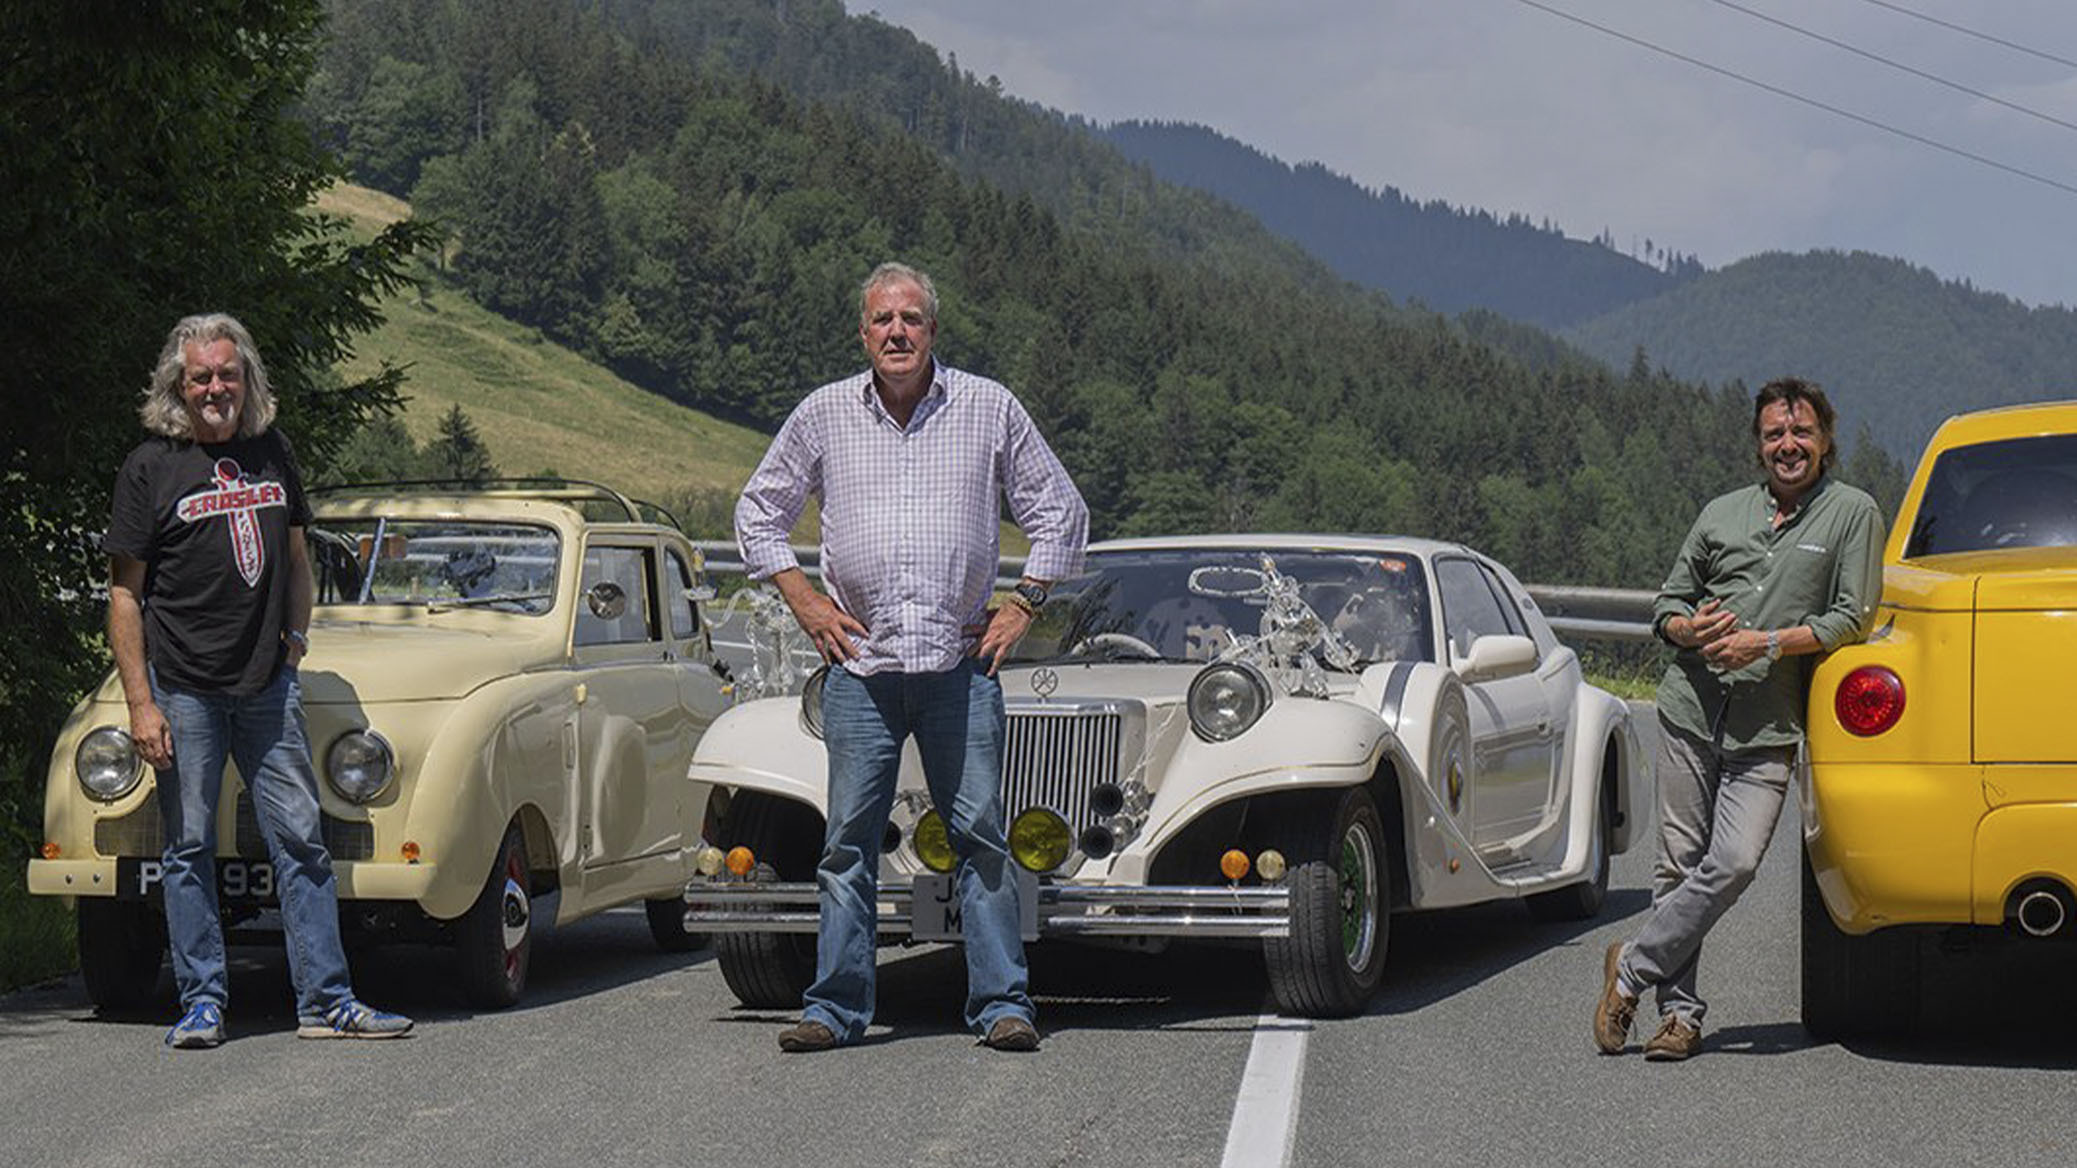 The Grand Tour Returns To Our Screens Next Month: Here's What We Know